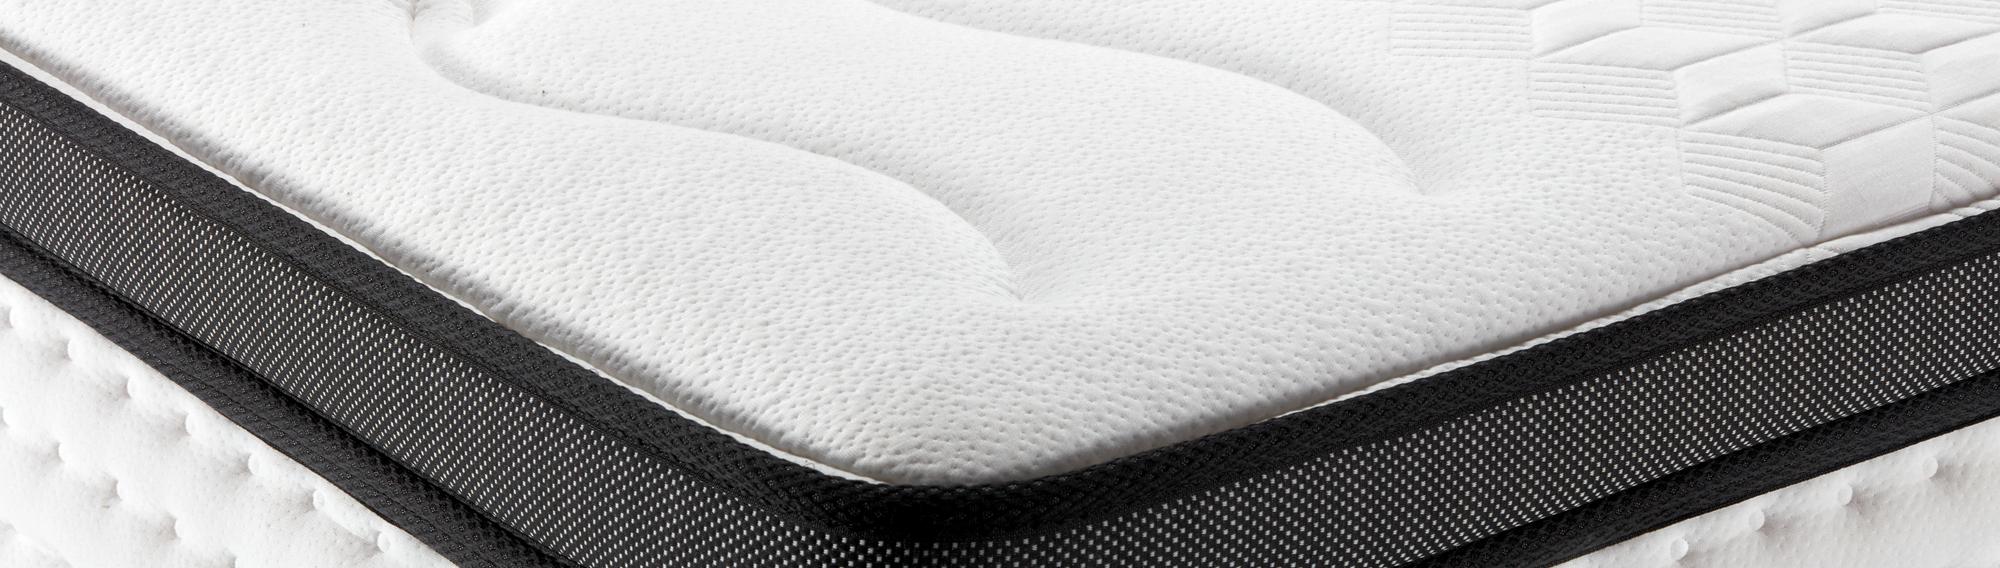 Image of a plush, affordable mattress from Superior Rent to Own